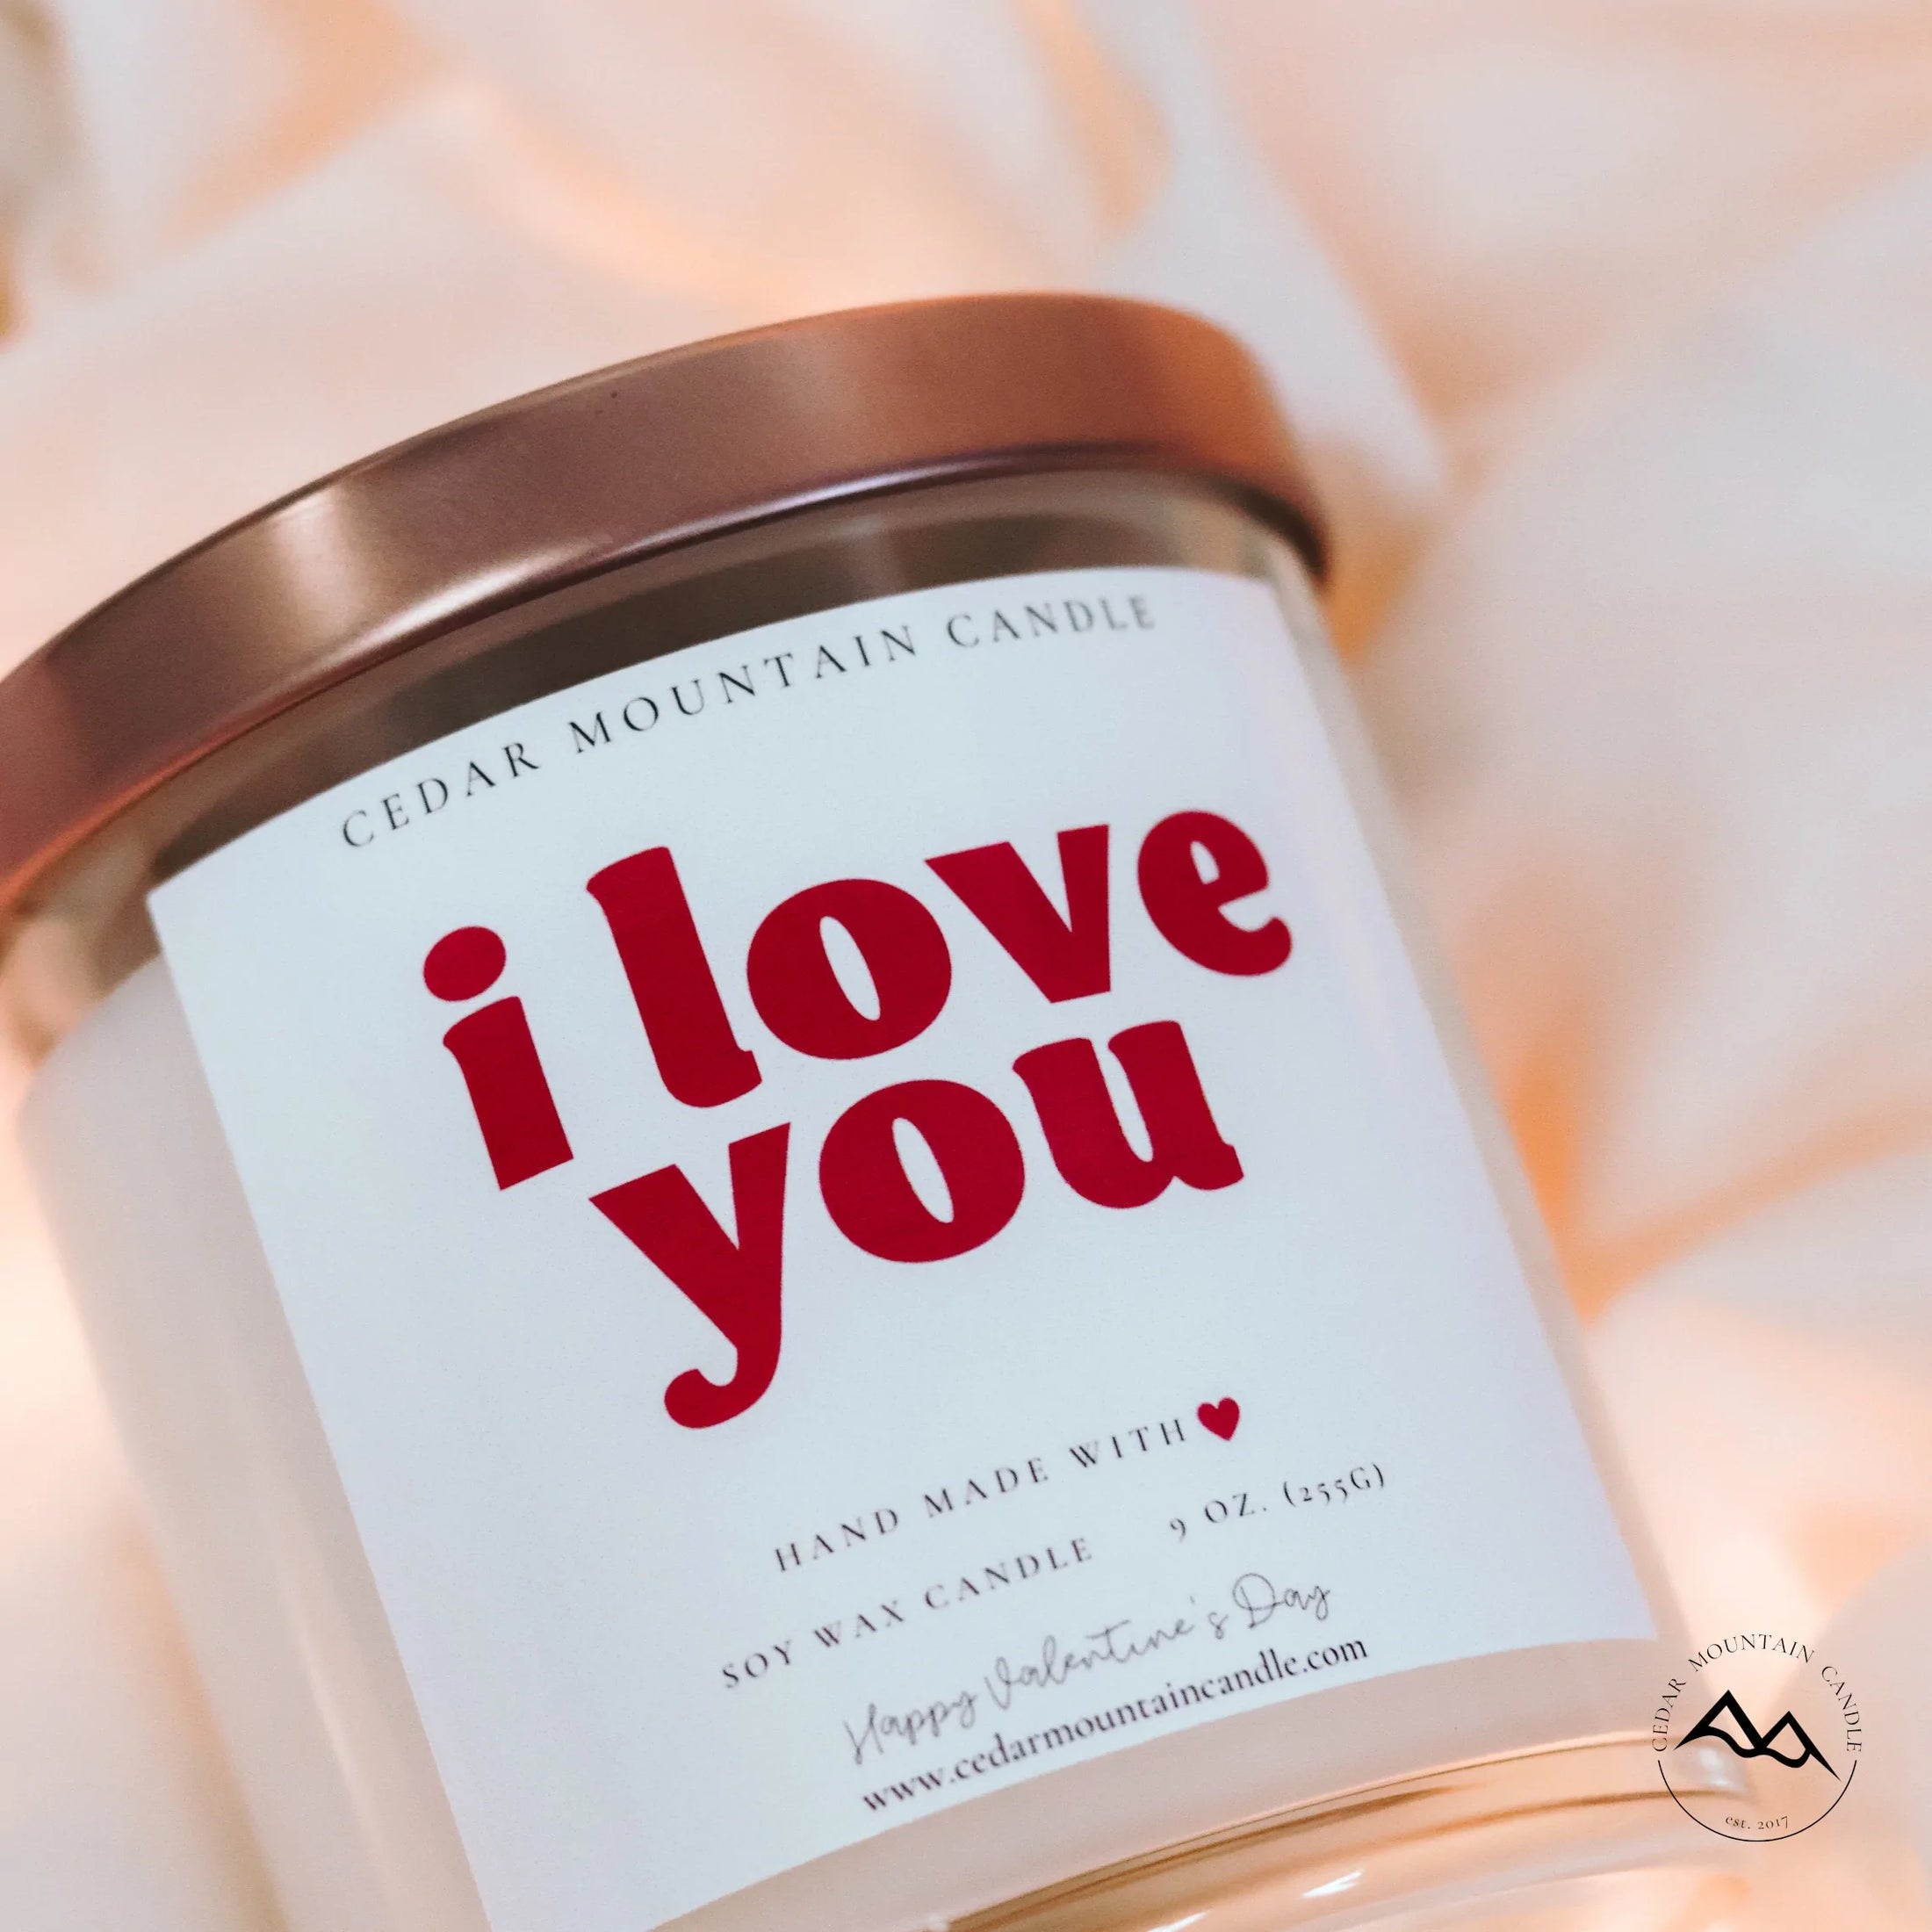 Valentine's Day Scented Soy Candle 9 oz Whiskey Glass Jar